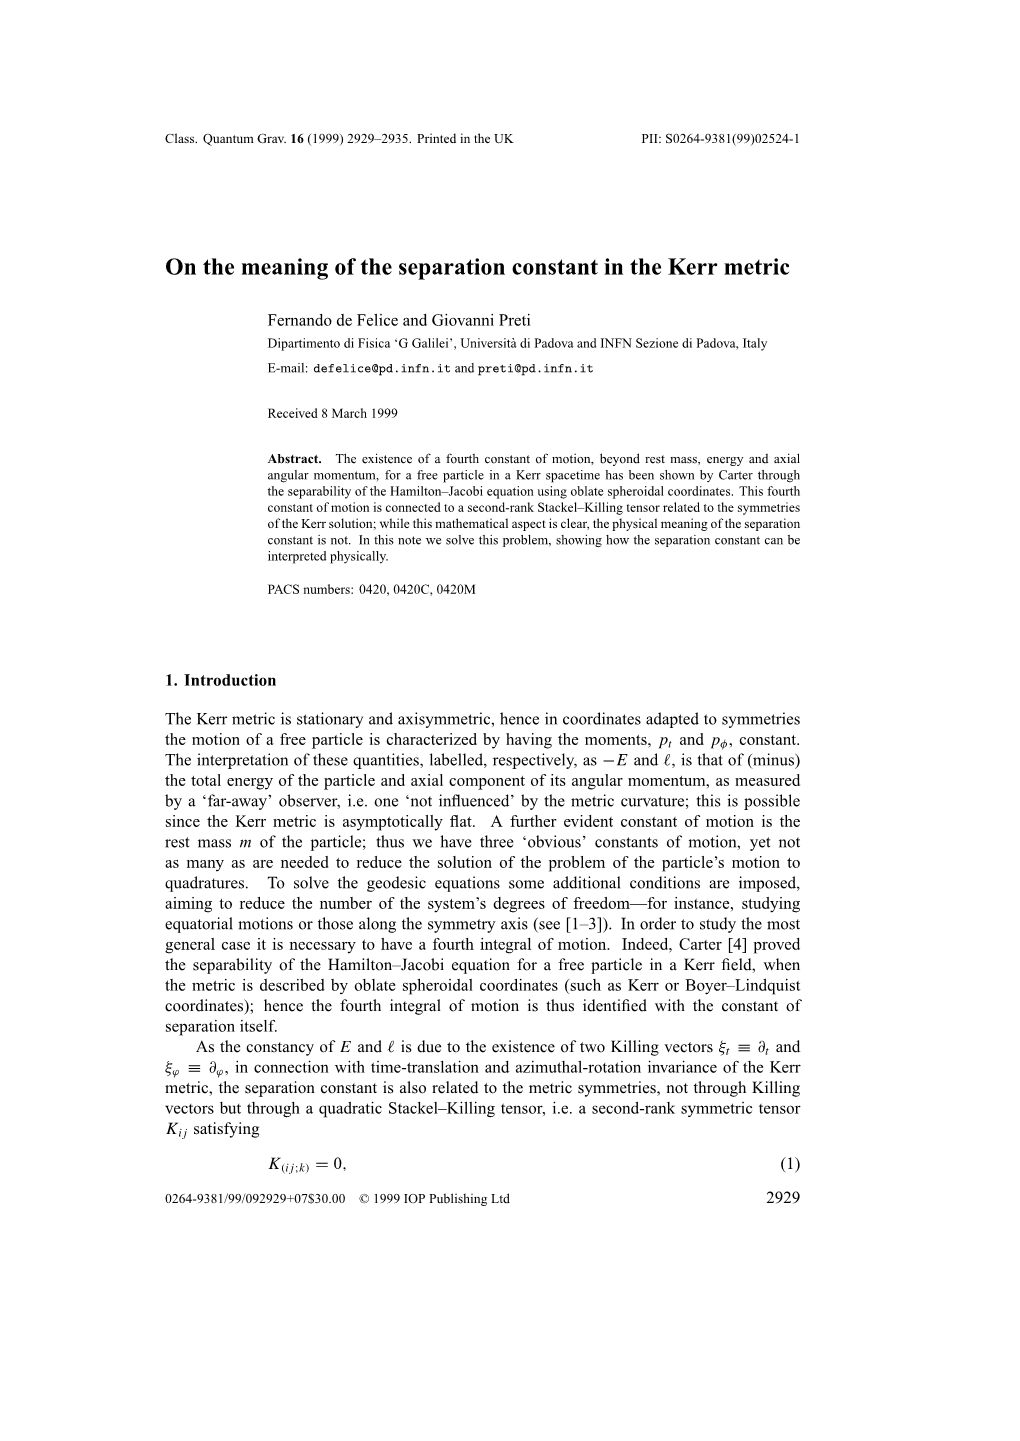 On the Meaning of the Separation Constant in the Kerr Metric